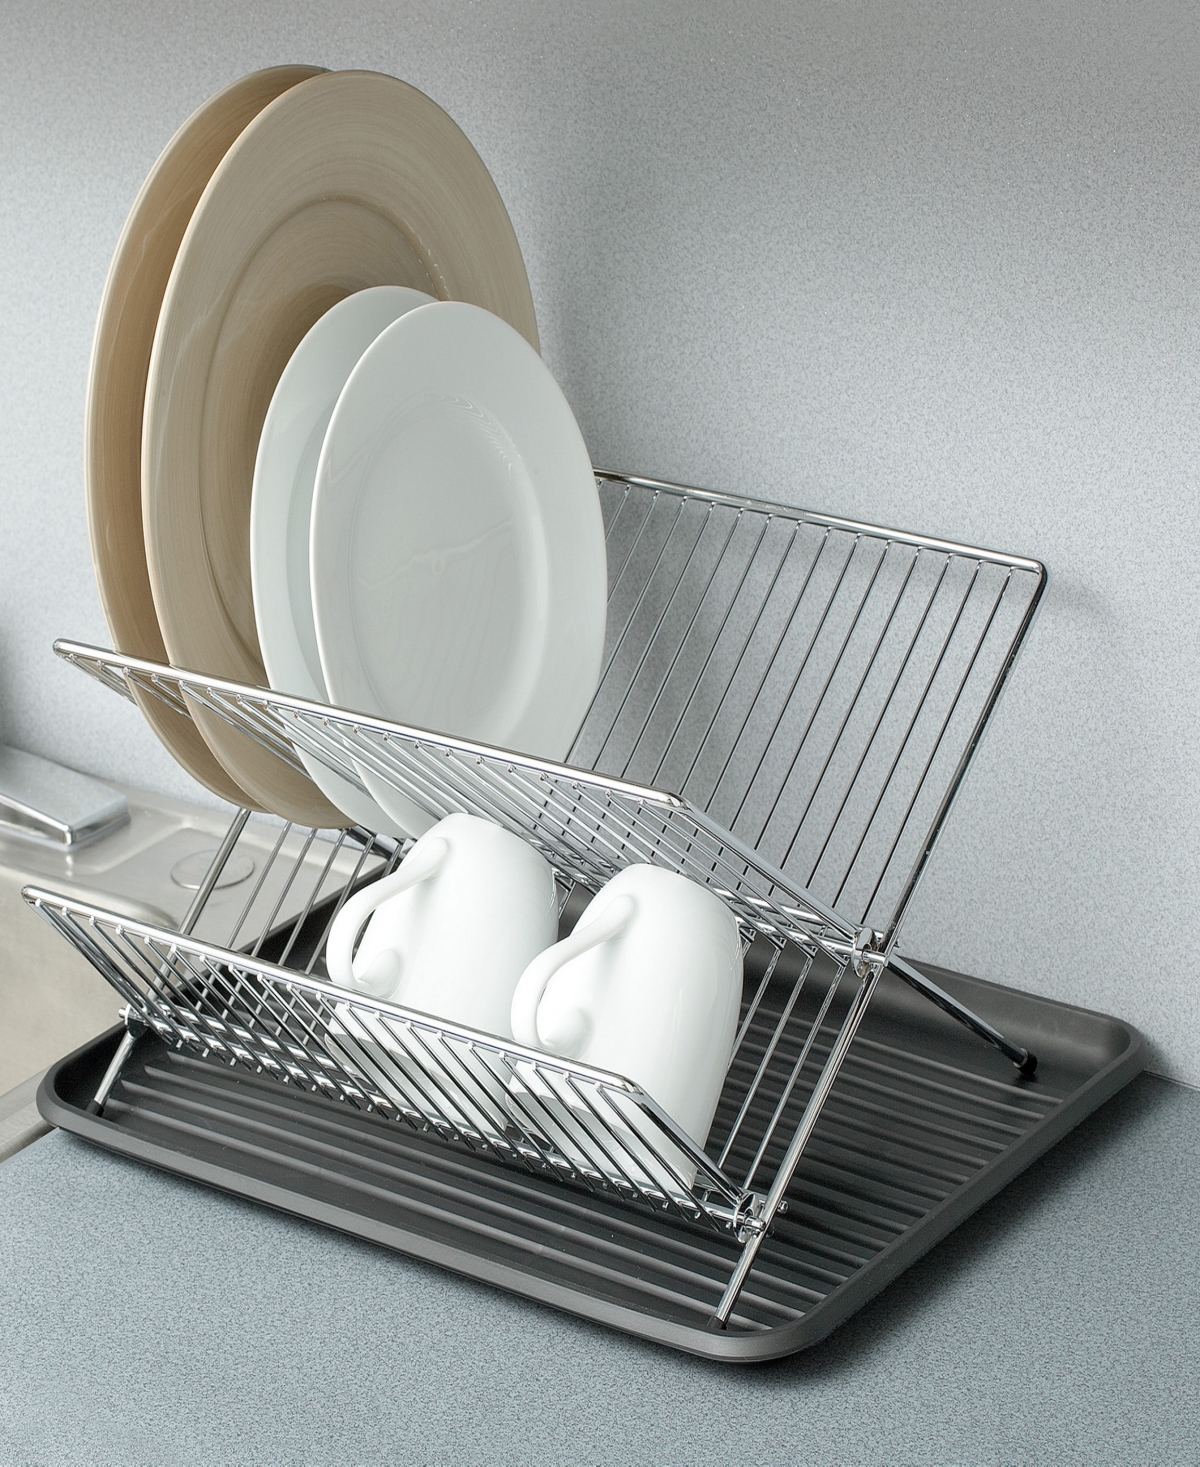 Shop Smart Design Dish Drainer Rack With In Sink Or Counter Drying In Chrome